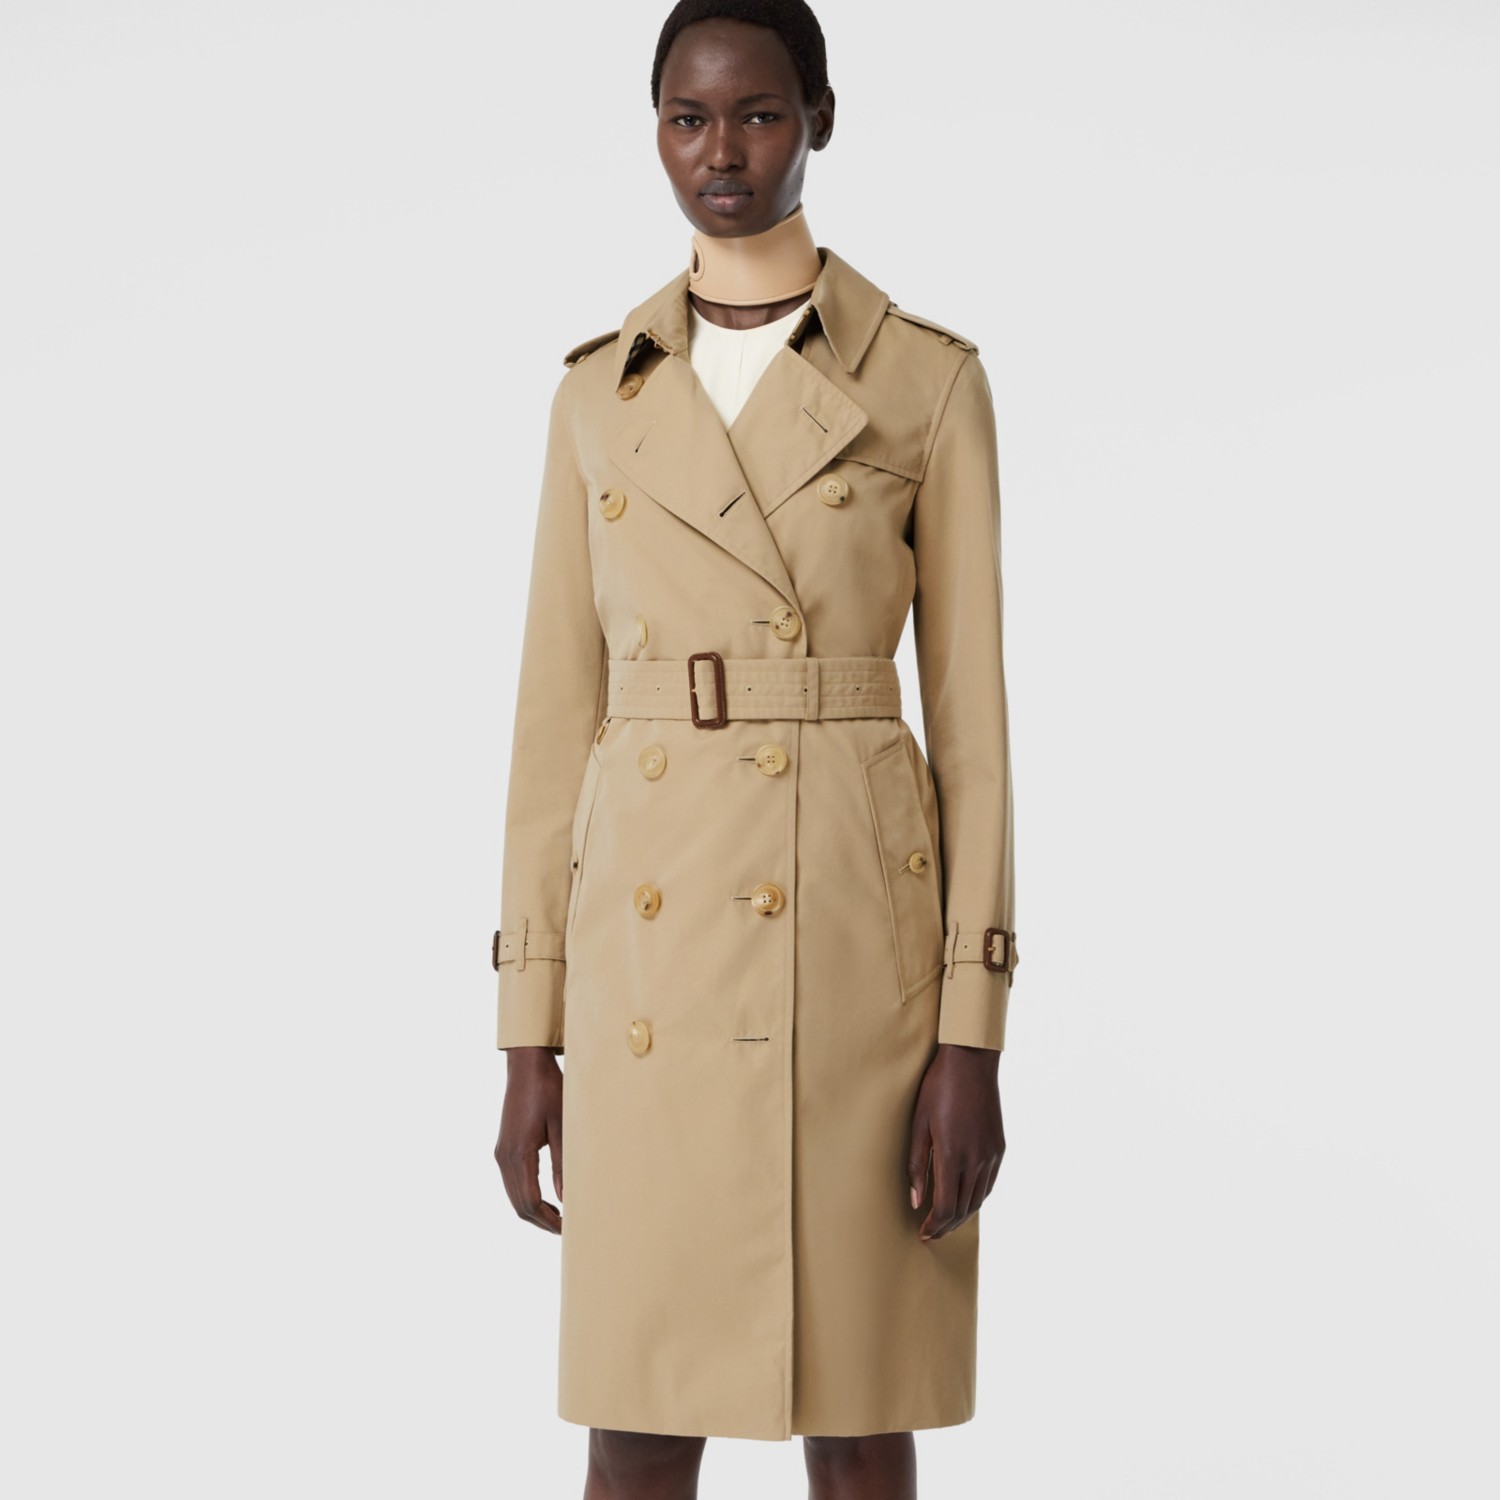 Burberry Burberry Kensington Heritage trench coat Luxury Brand Clothing  Clothes Outfit For Women ND - burberry jacquard pattern blazer item -  Slocog Shop